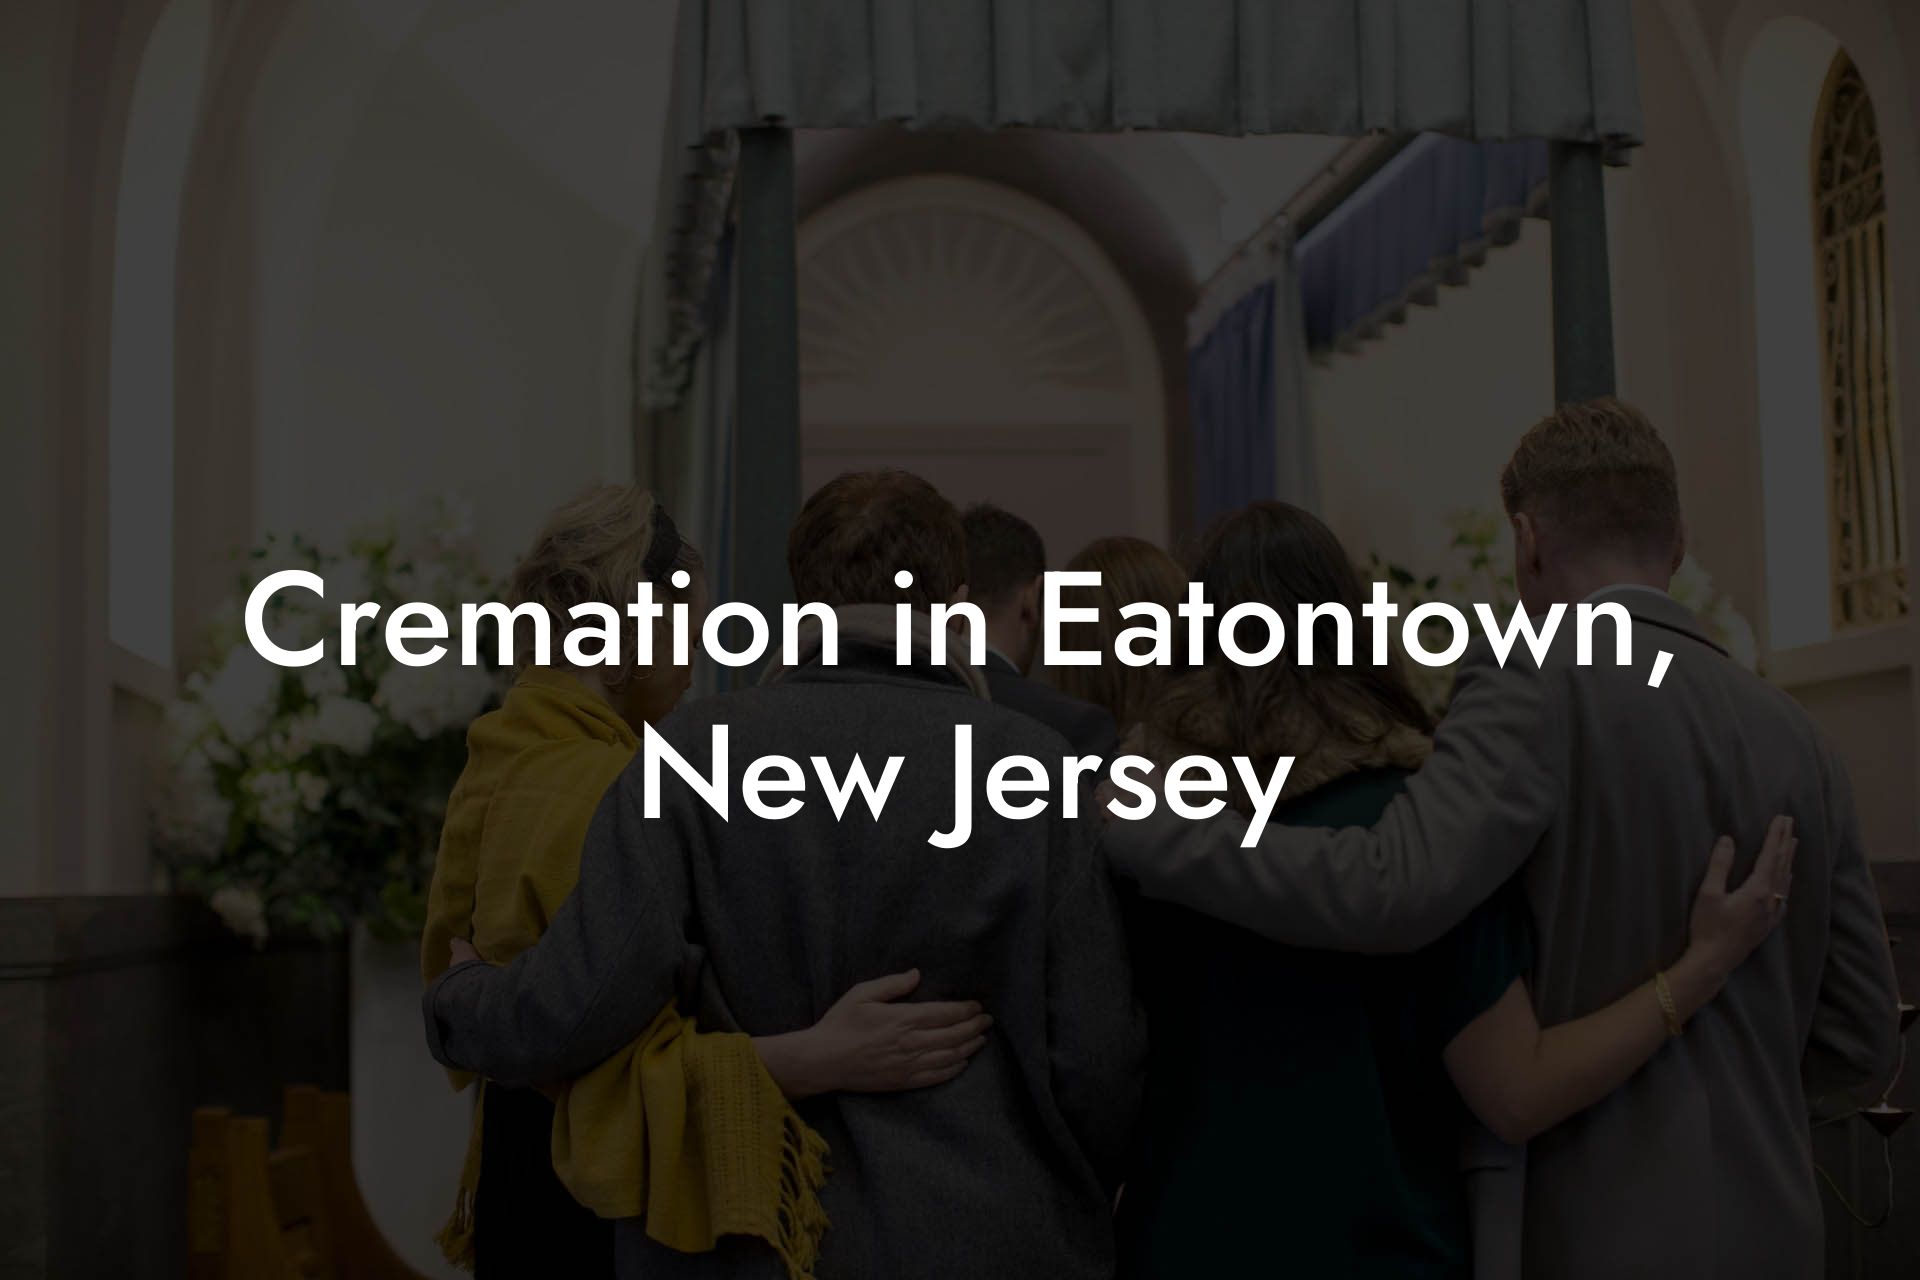 Cremation in Eatontown, New Jersey